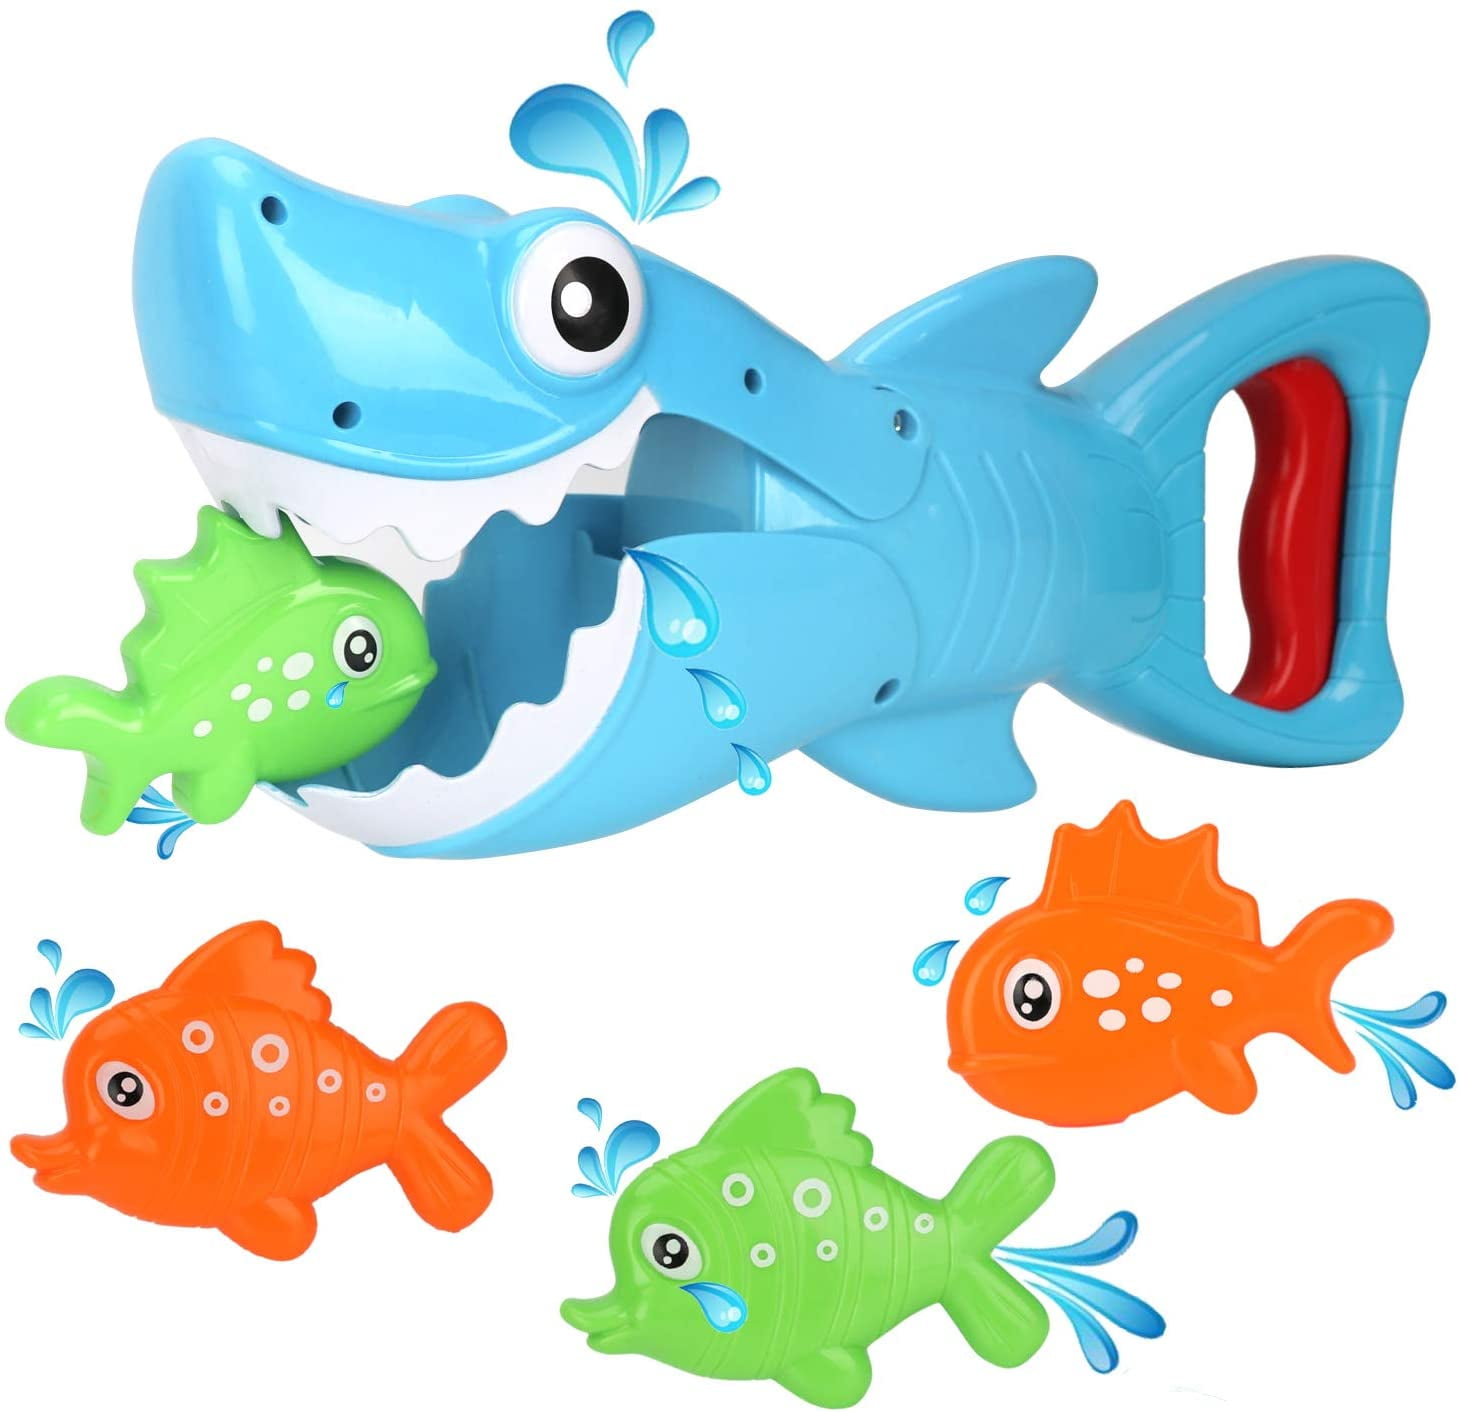 Blue Shark with Teeth Biting Action Include 4 Toy Fish Bath Toys for Boys Girls Toddlers INvench Shark Grabber Baby Bath Toys 